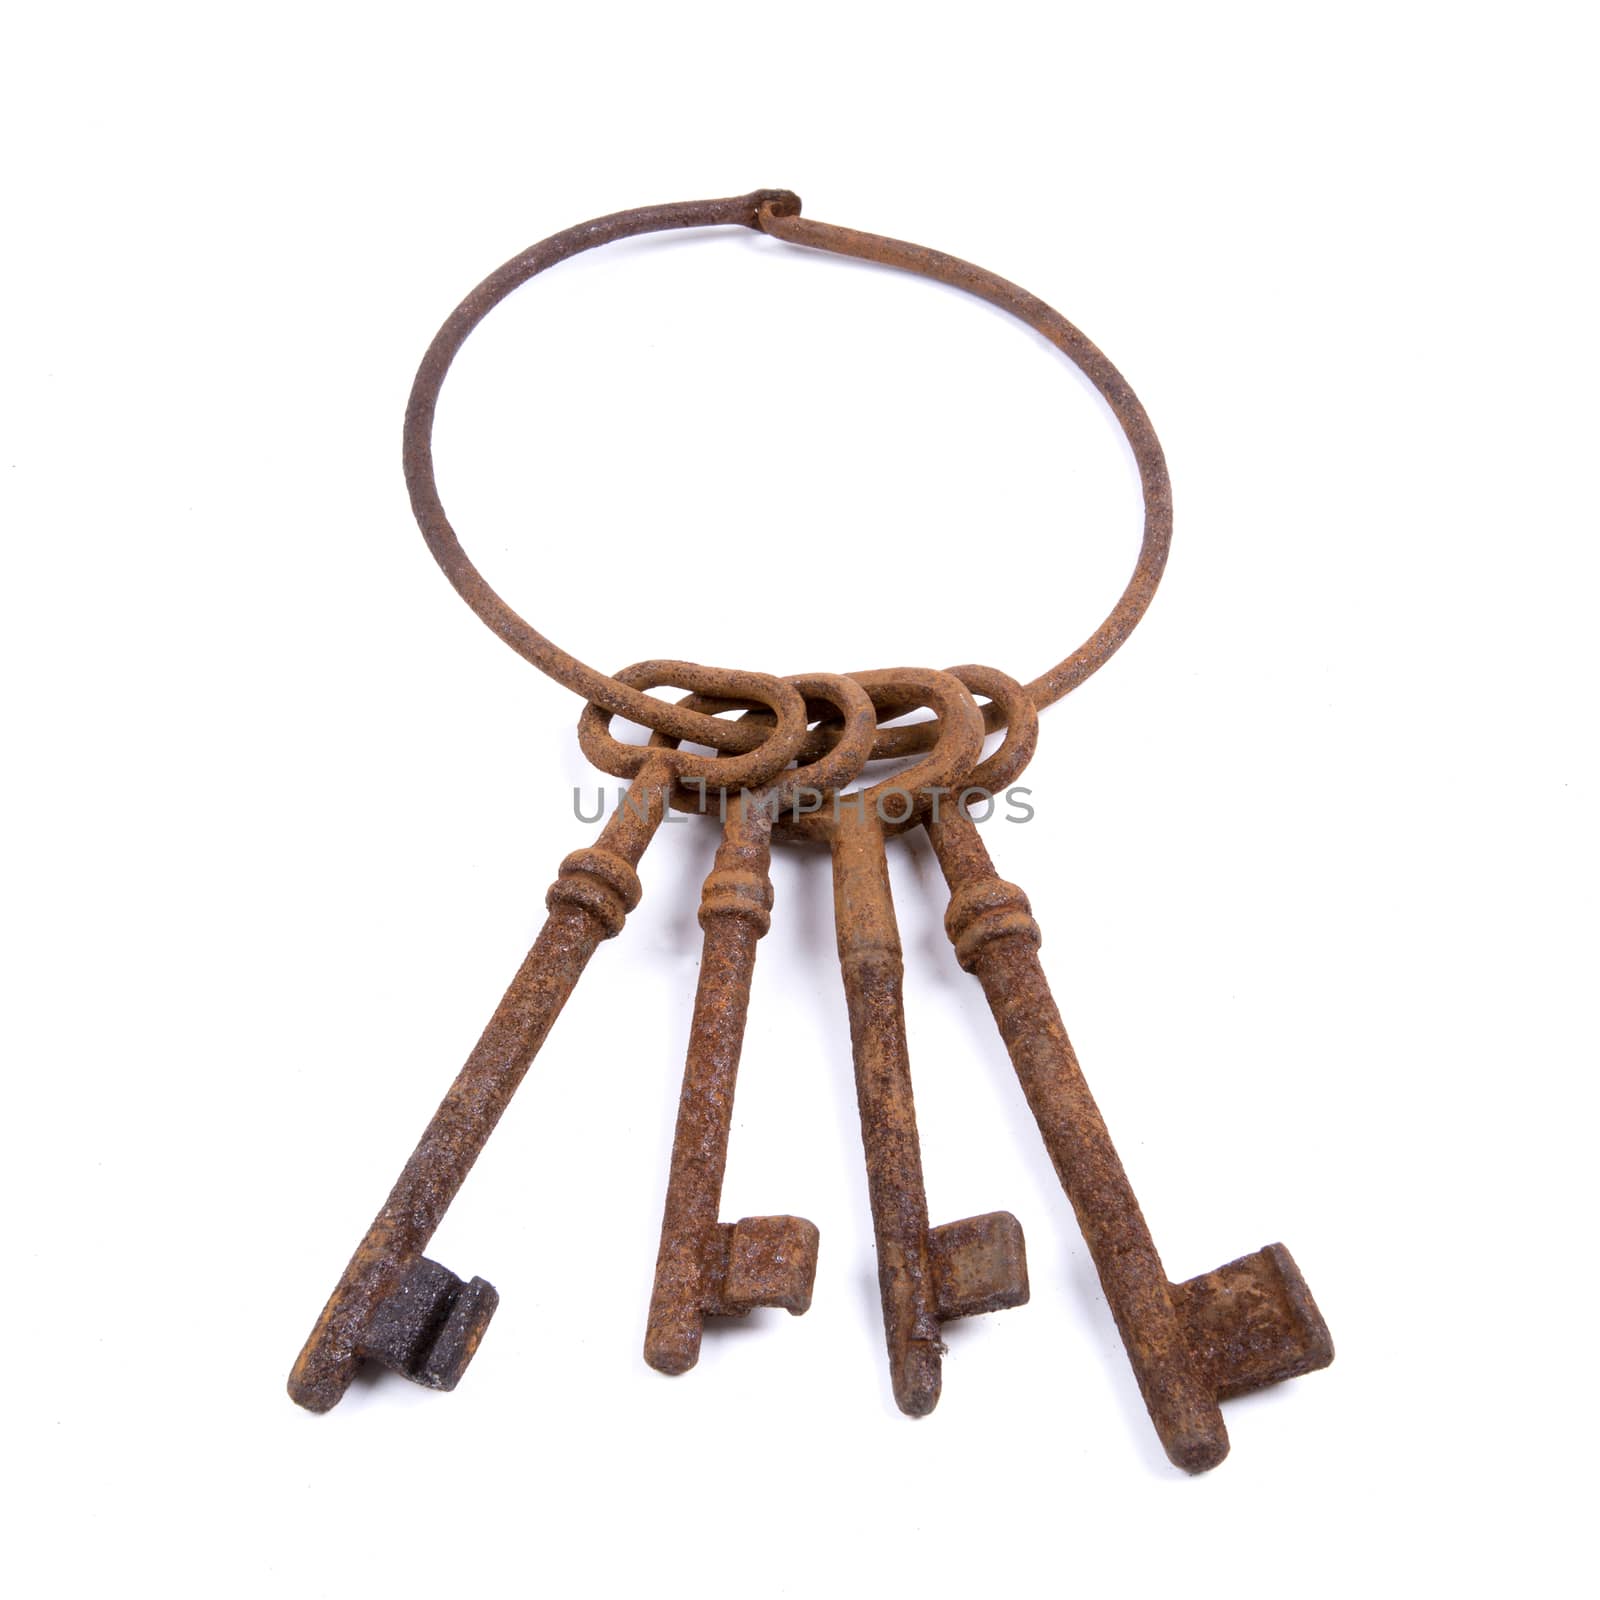 Rusty keys isolated on a white background